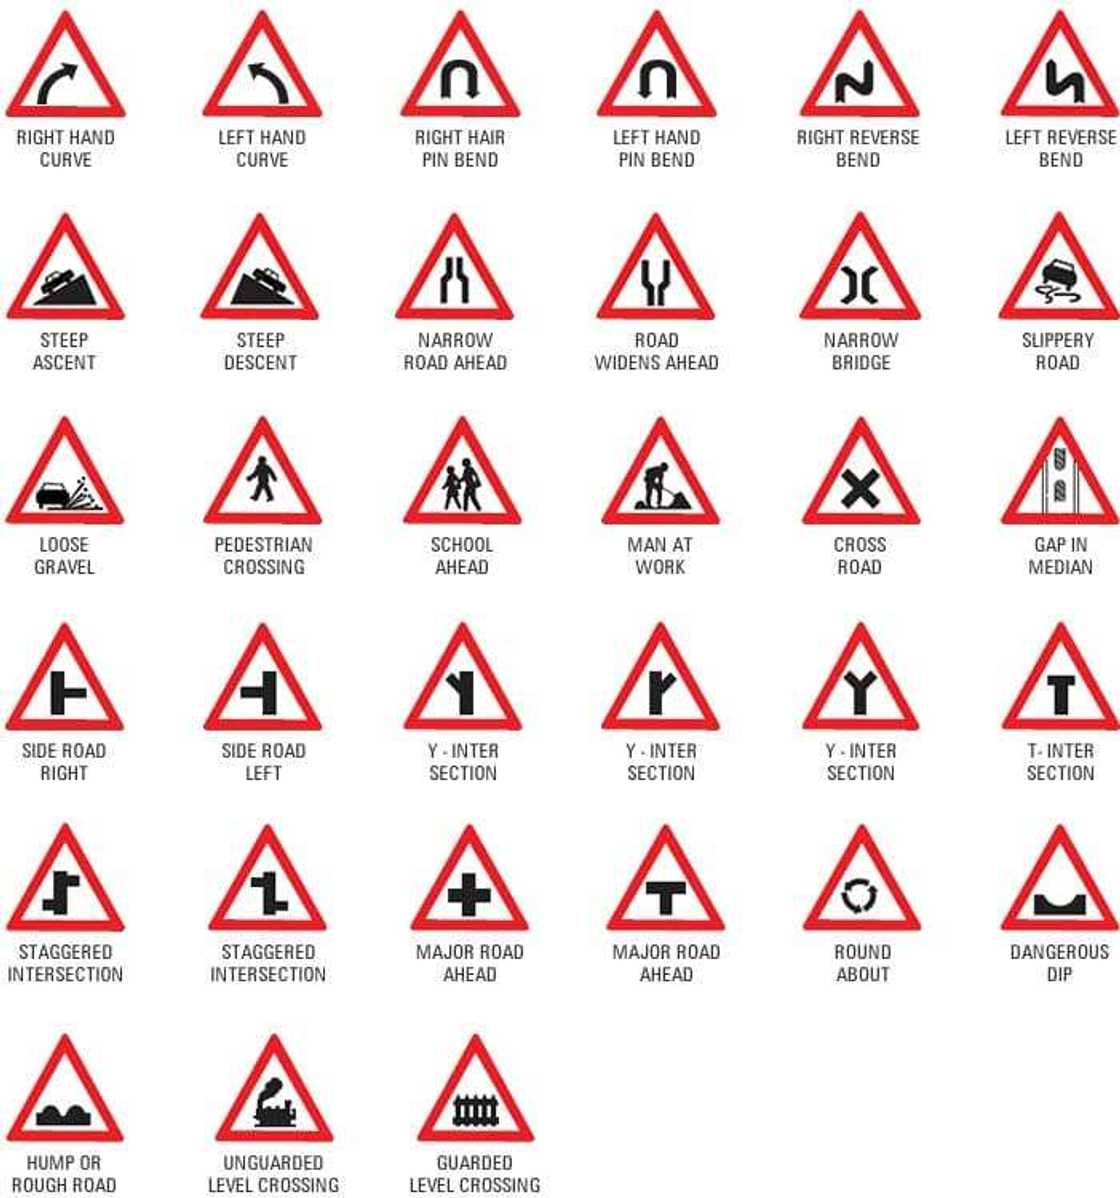 DVLA road signs and meanings in Ghana